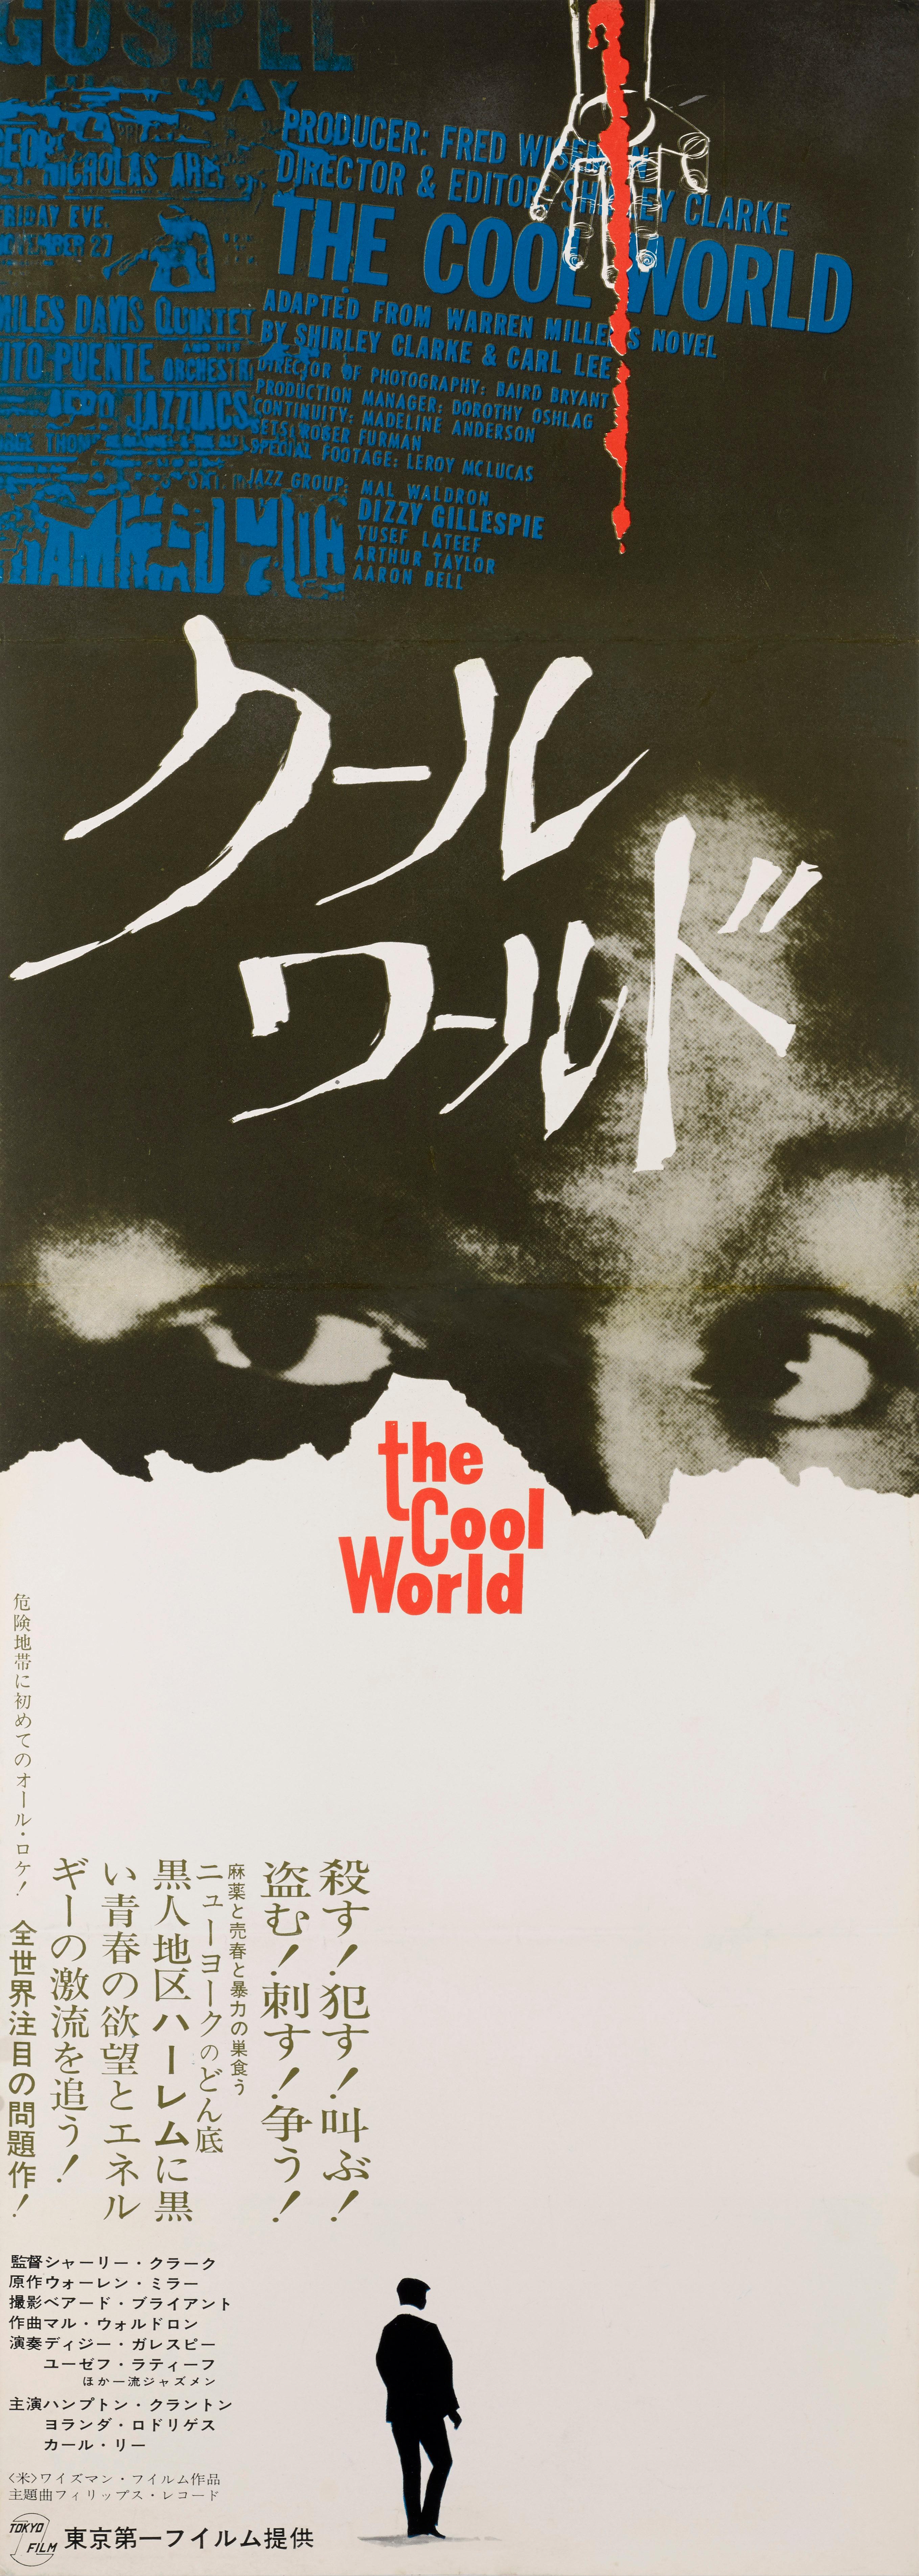 Original Japanese movie poster for the 1964 documentary starring Rony Clanton, Carl Lee, Yolanda Rodriguez, and directed by Shirley Clarke.
This poster is conservation paper backed and would be shipped flat by Federal Express.